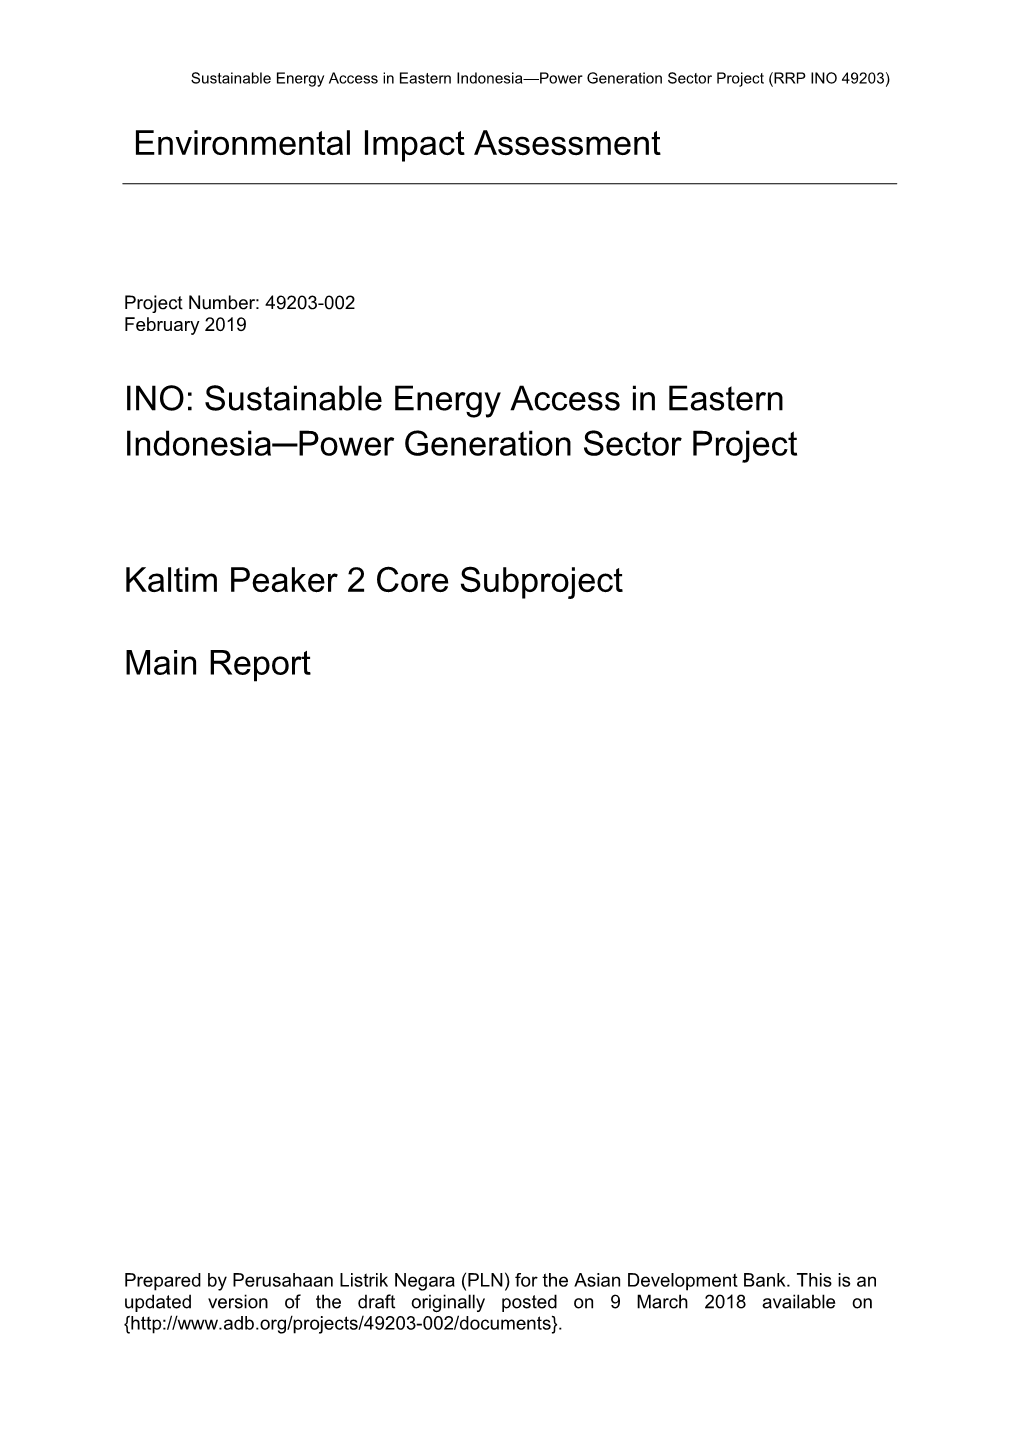 Sustainable Energy Access in Eastern Indonesia-Power Generation Sector Project: Kaltim Peaker 2 Core Subproject Updated Environm